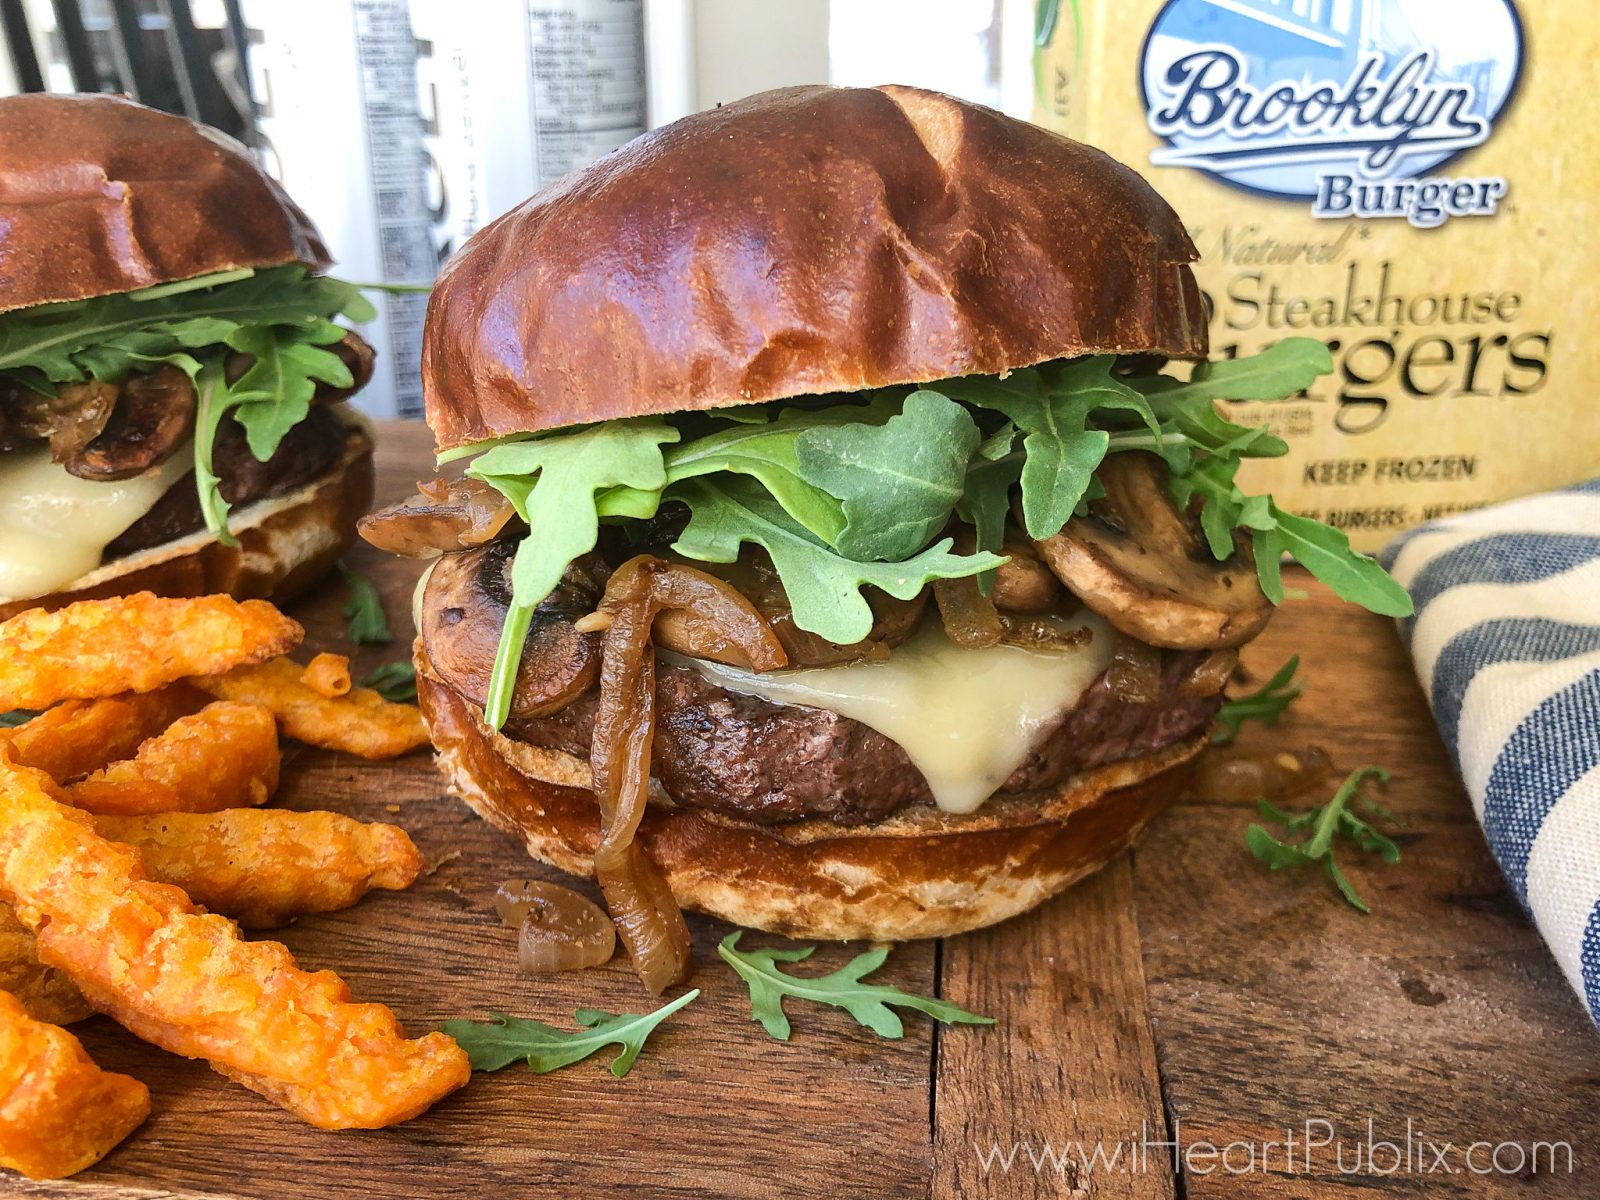 Can’t-Miss Deals On Brooklyn Burger Steakhouse Burgers This Week At Publix – $9.99 For The 2-Pound Boxes Of Burgers!